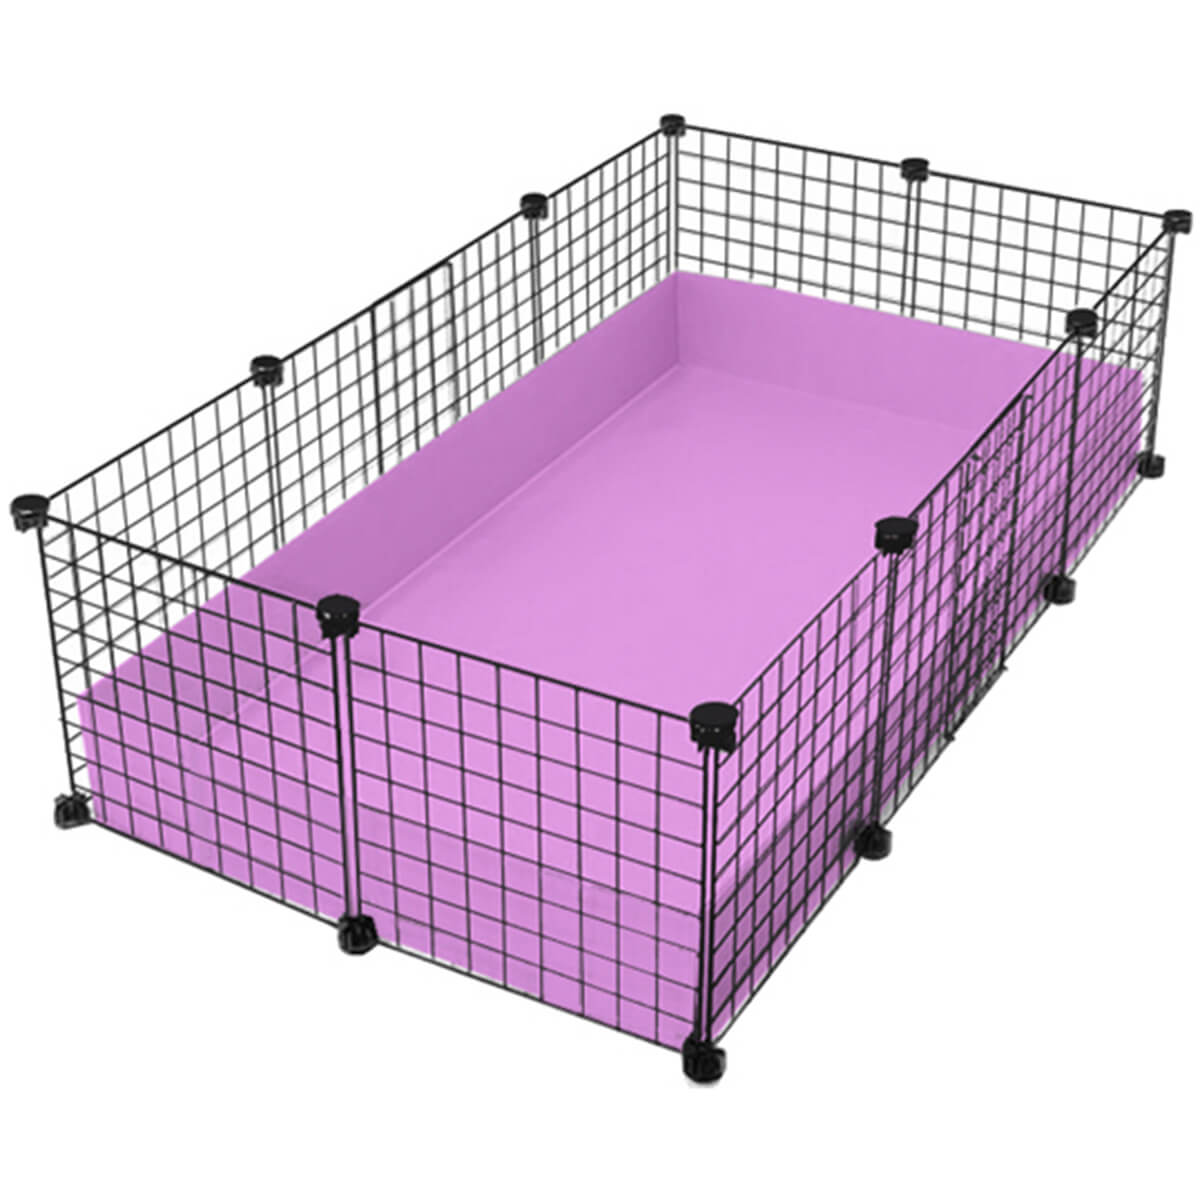 Medium (2x3.5 Grids) Cage - Standard Cages - Cagetopia